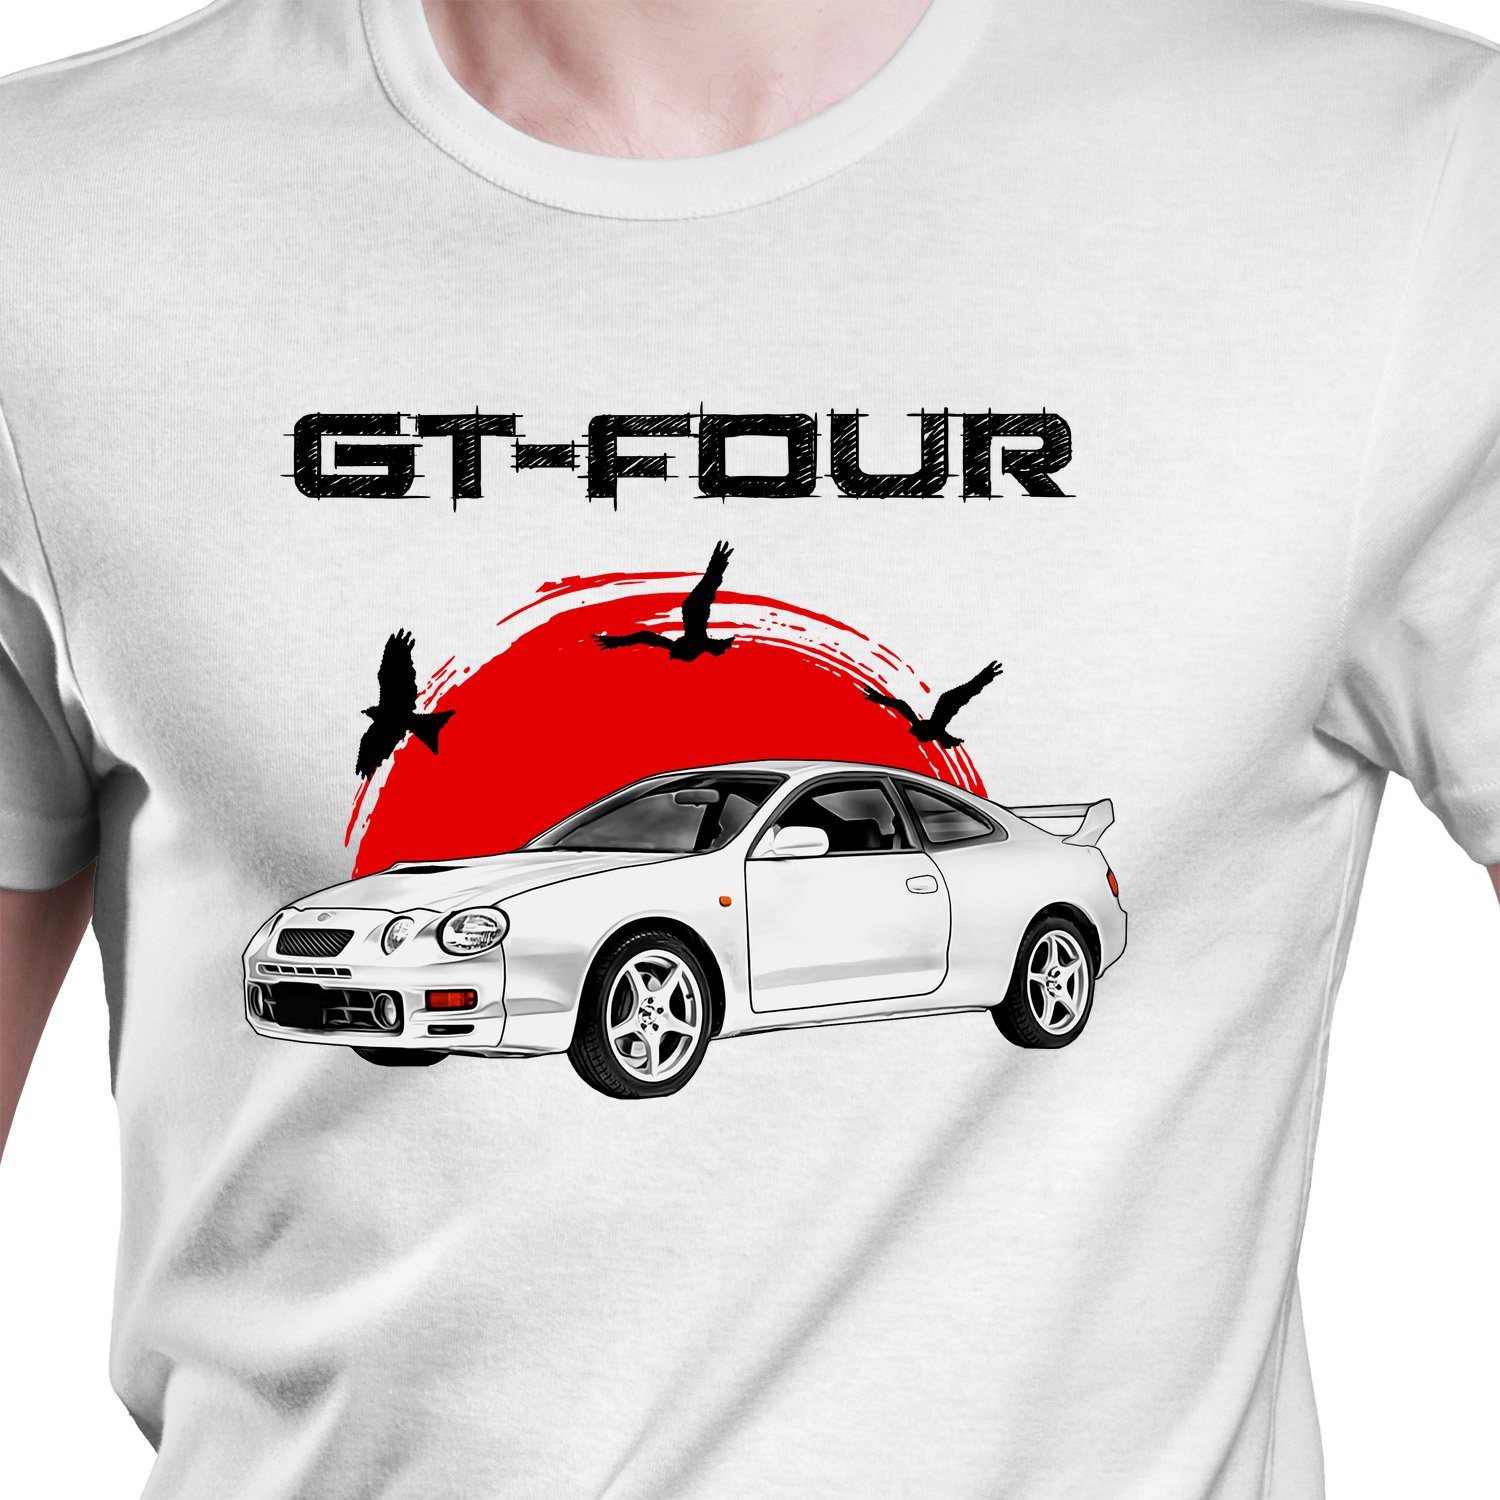 Missing unpaid Kilometers T-shirt with Toyota Celica GT-FOUR. Gift for Japan Cars Lovers